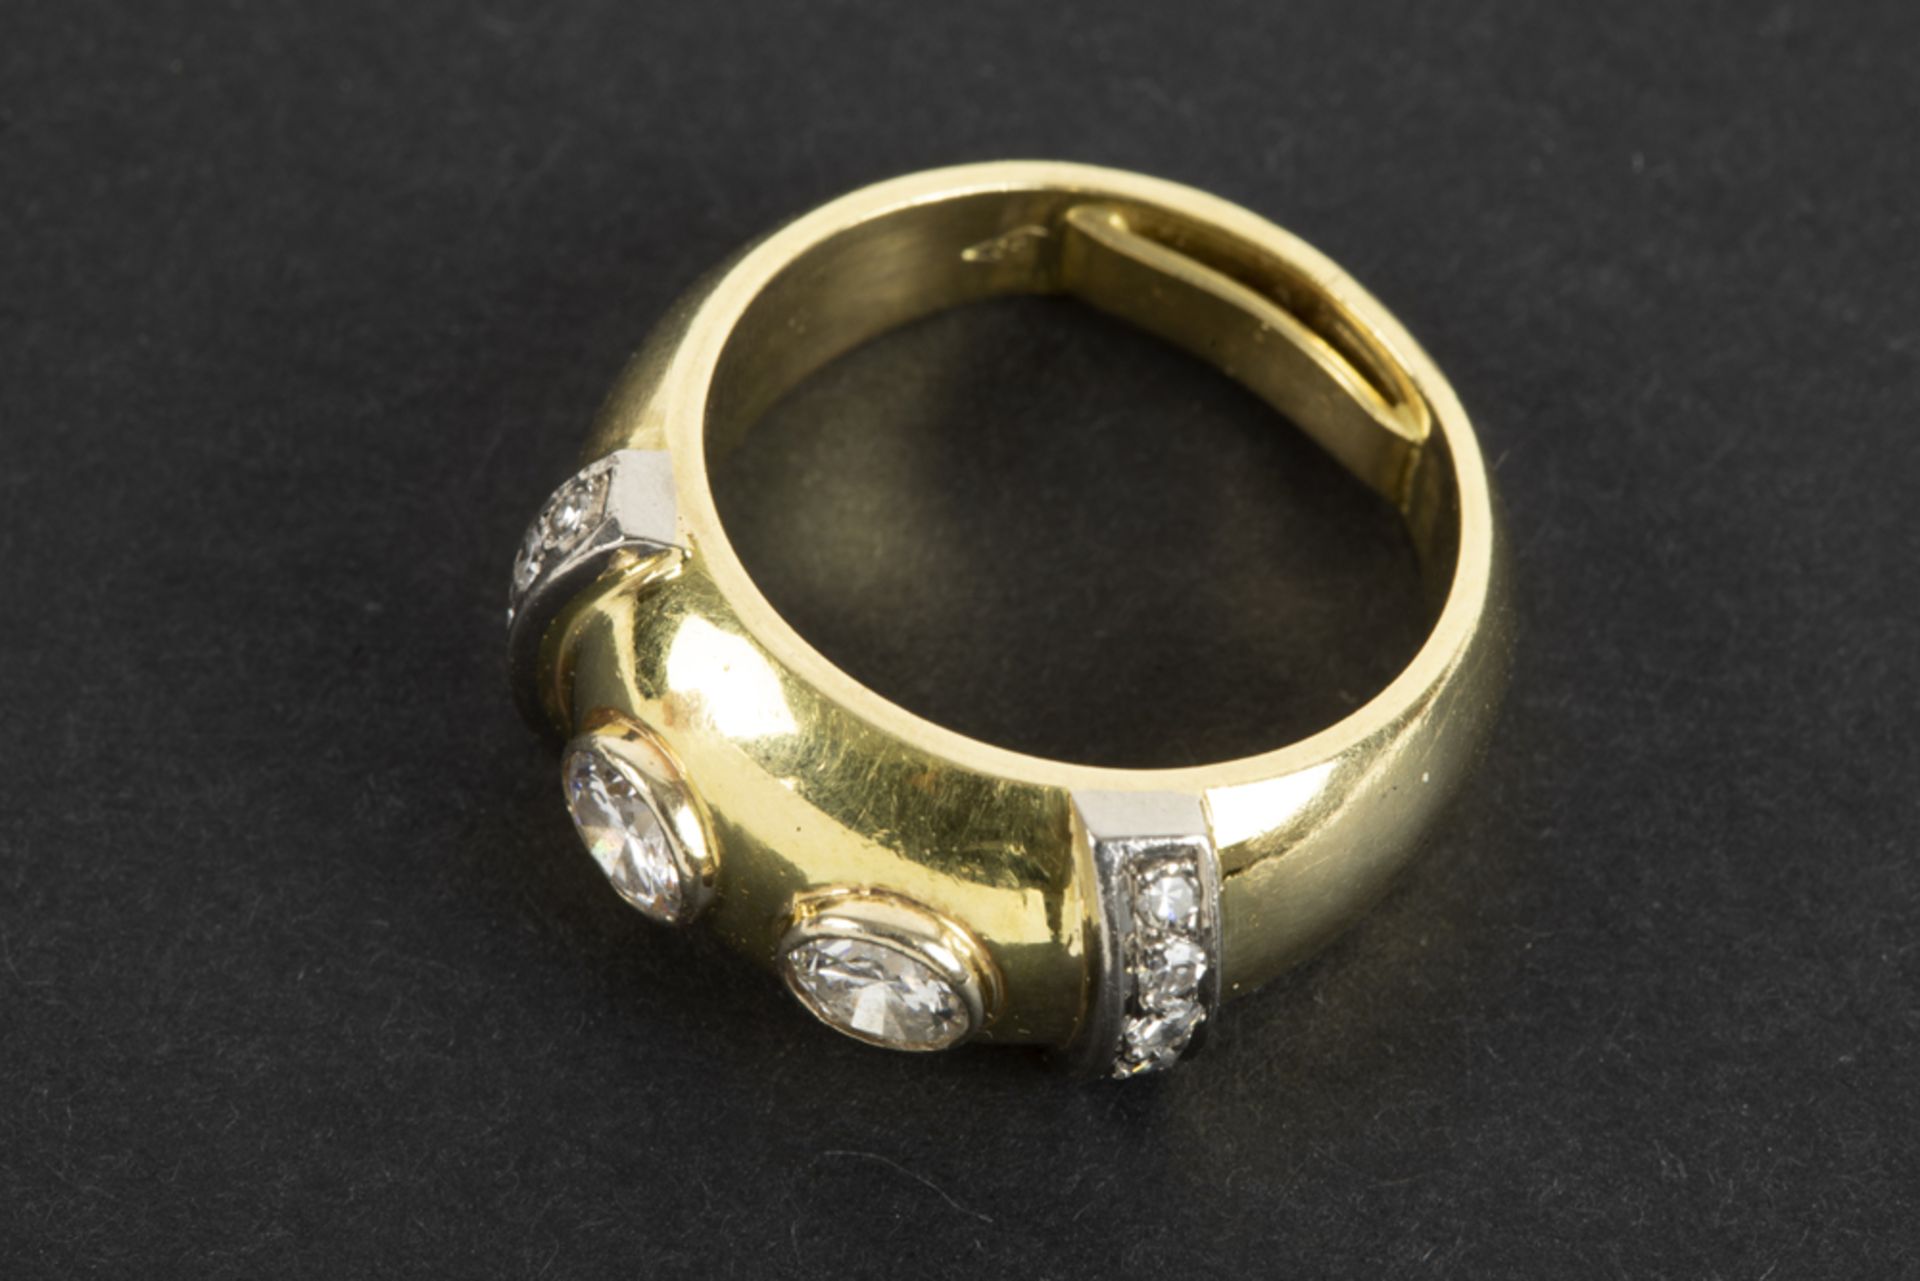 ring in yellow gold (18 carat)-brilliants with ca 0,70 carat of high quality brilliant cut - Image 2 of 2